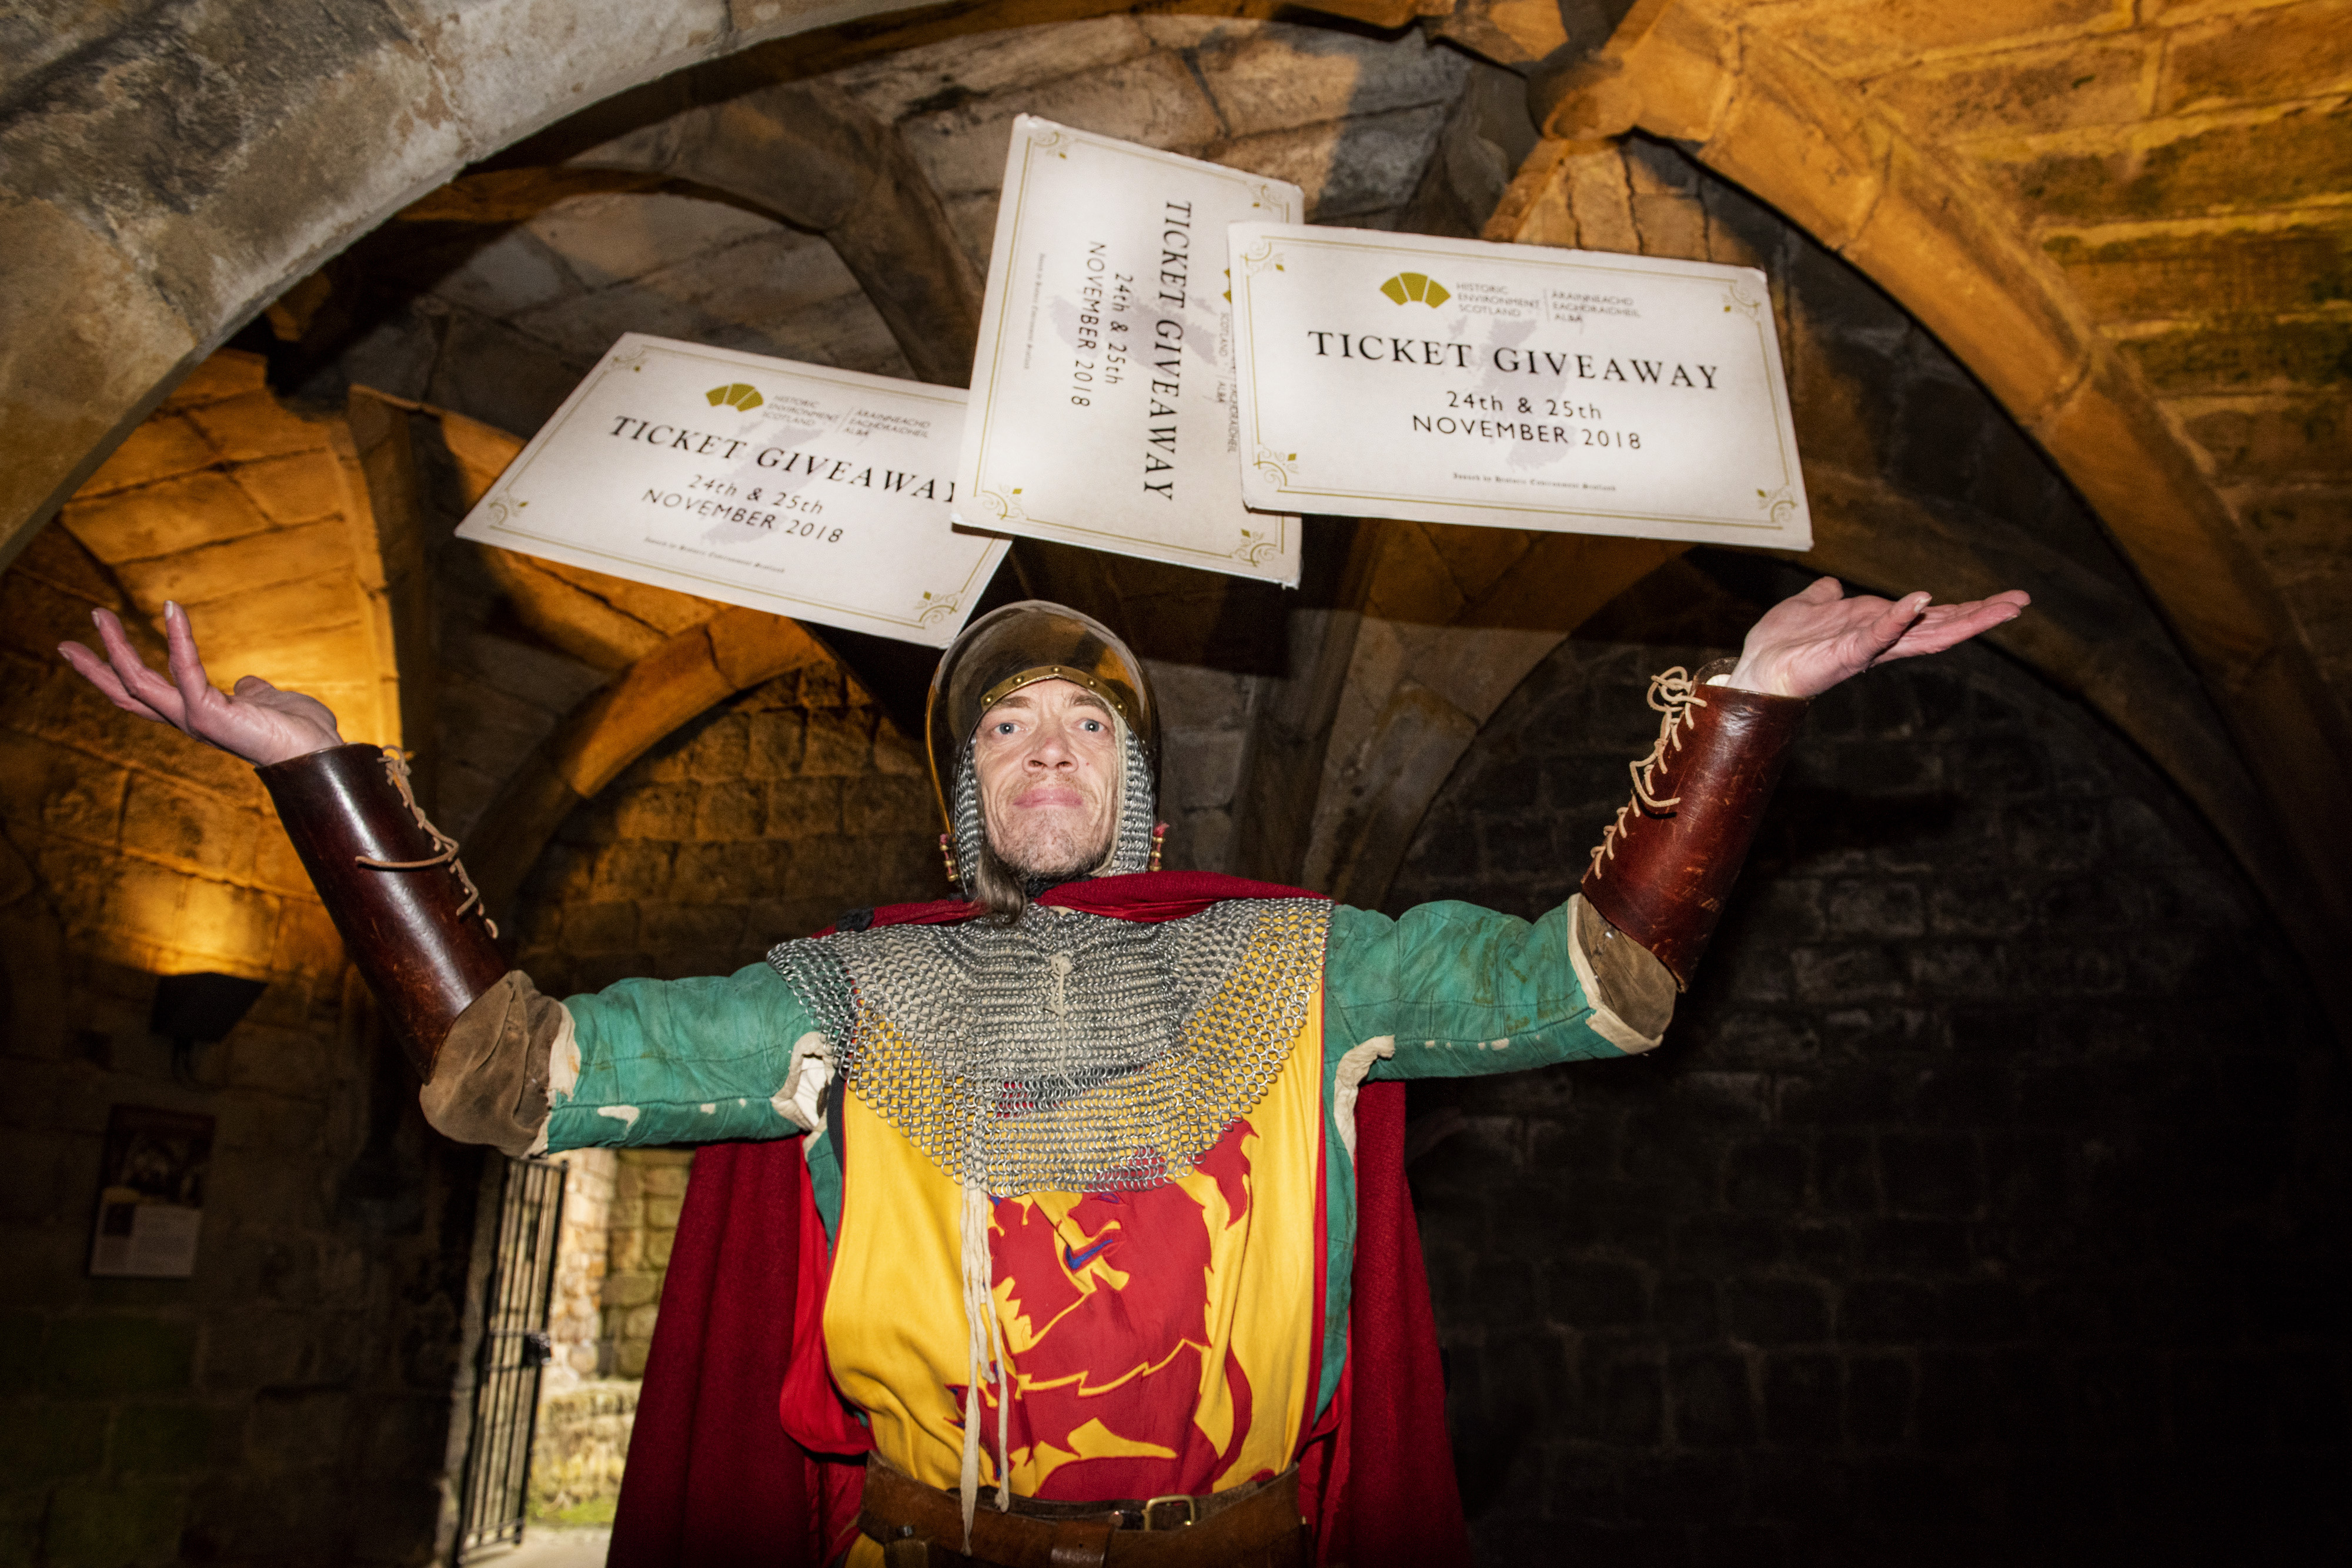 The ticket giveaway was launched by 'Robert the Bruce' at Dunfermline Abbey at the end of October